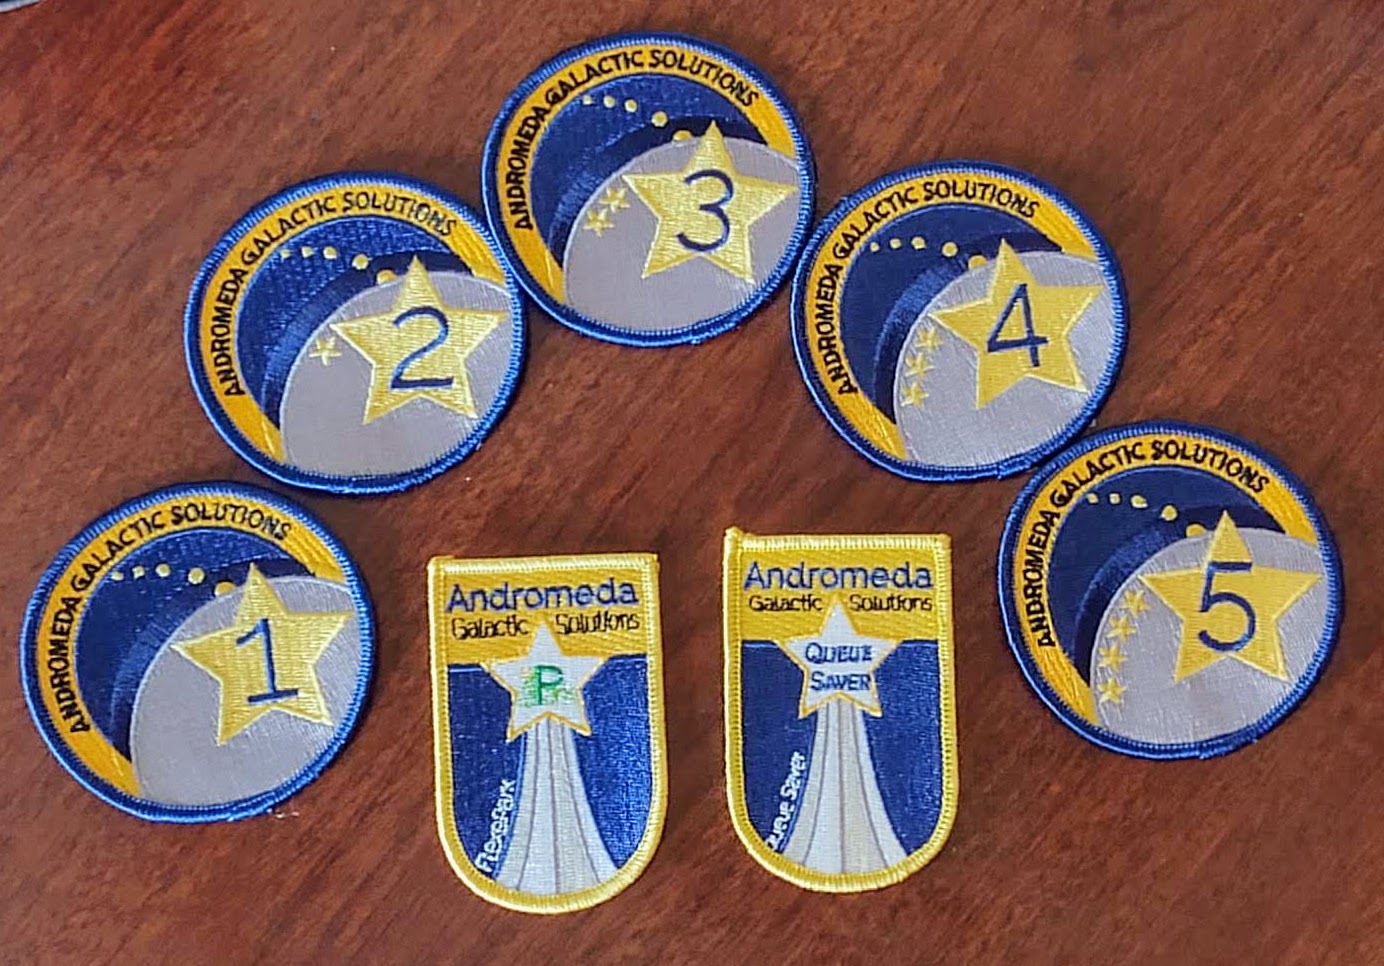 Round patches for Andromeda Galactic Solutions. Annual patches show 1 to 5 stars to represent the years with the company